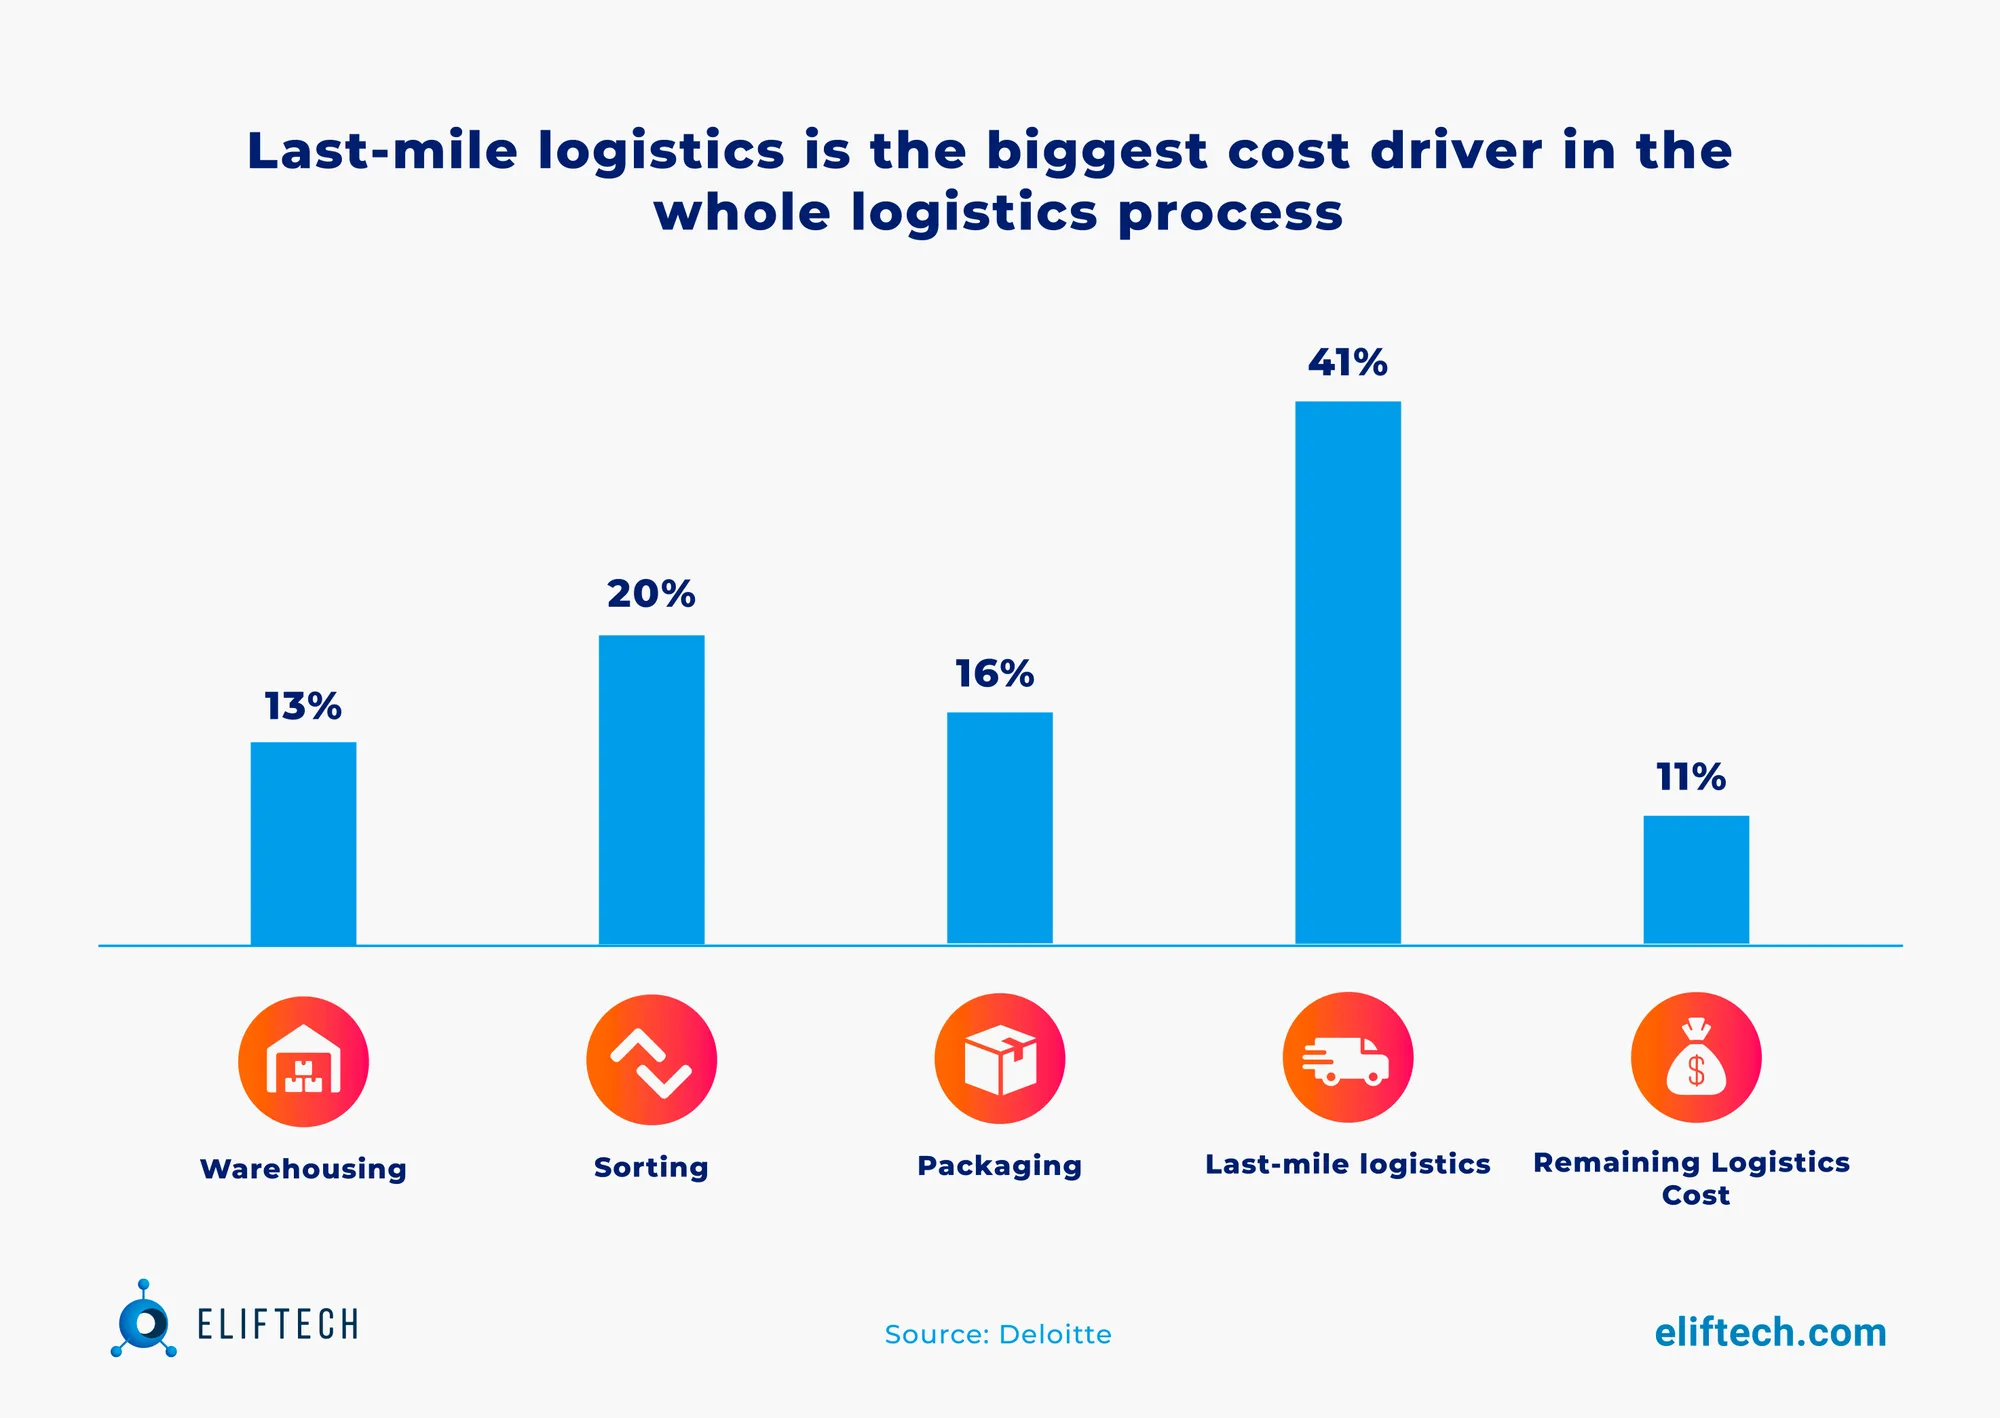 Last mile delivery: 41% of total cost